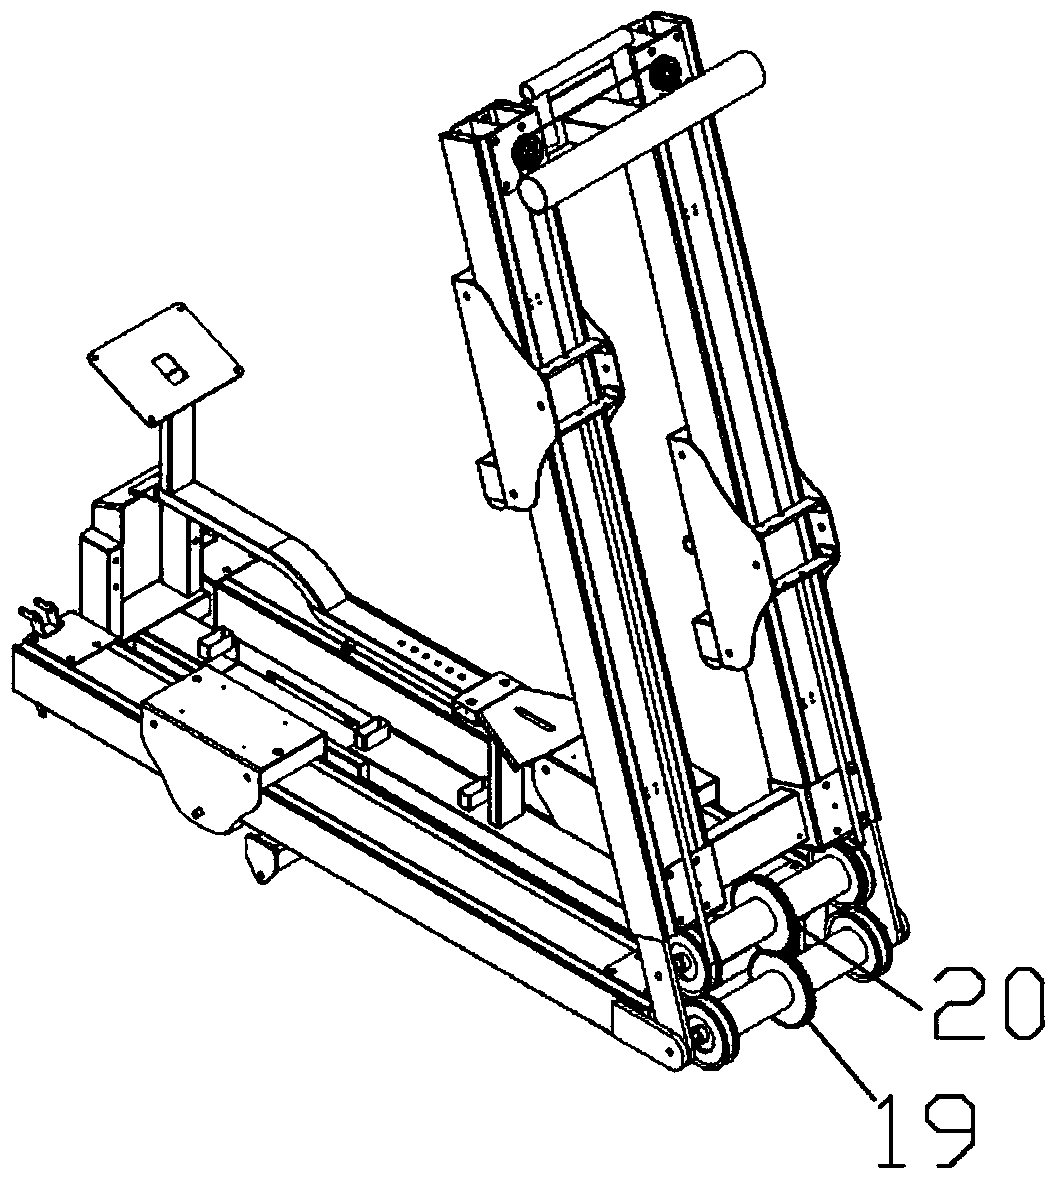 Folding-type crawling body builder with linkage mechanisms